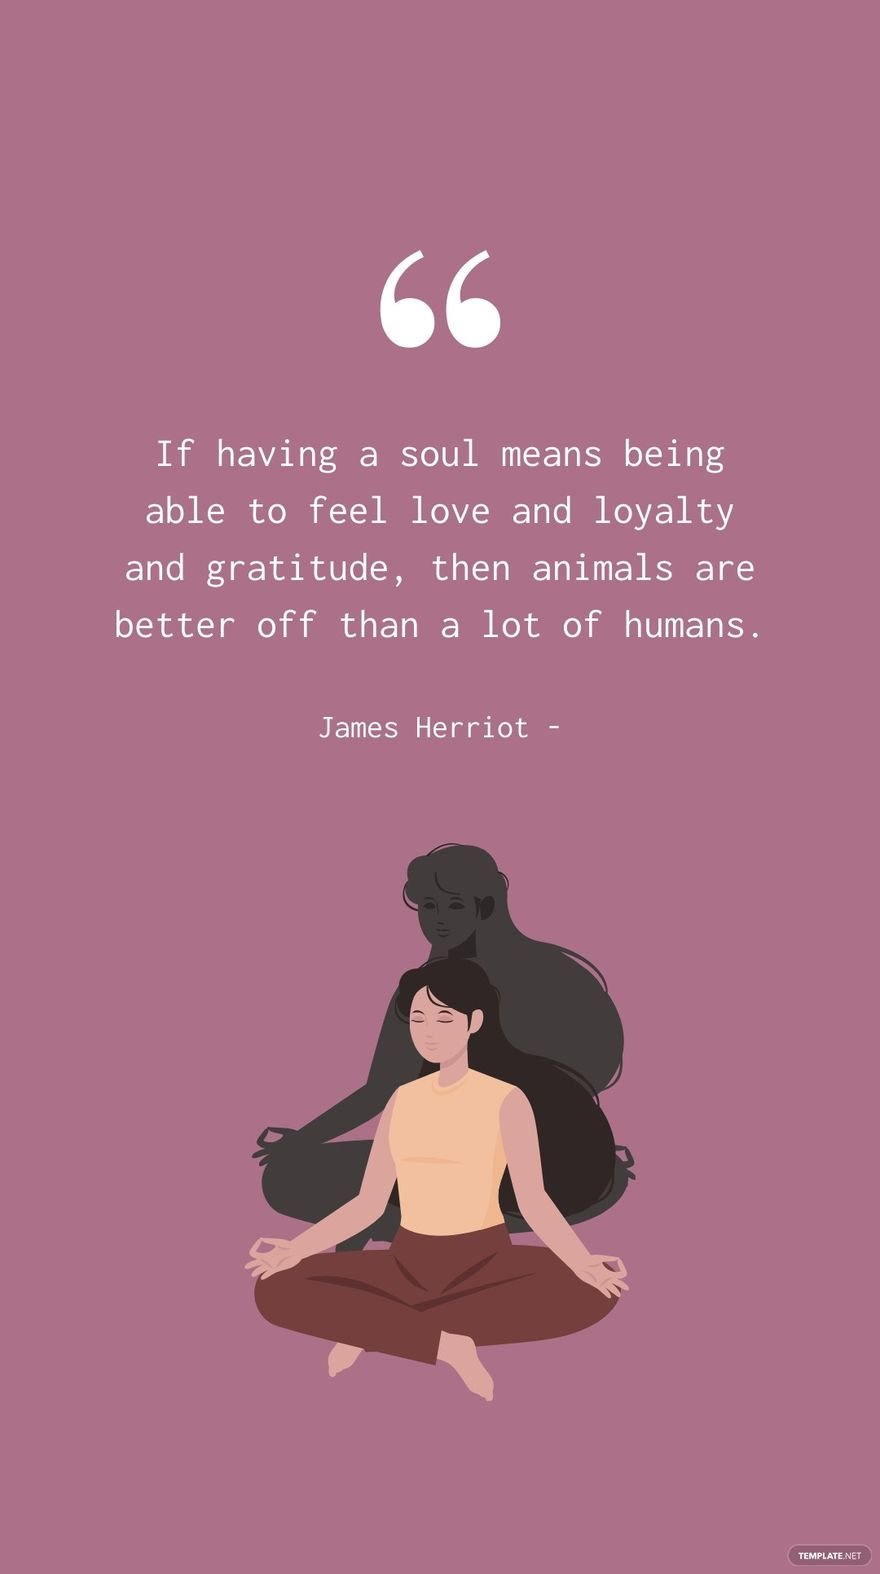 James Herriot - If having a soul means being able to feel love and loyalty and gratitude, then animals are better off than a lot of humans.